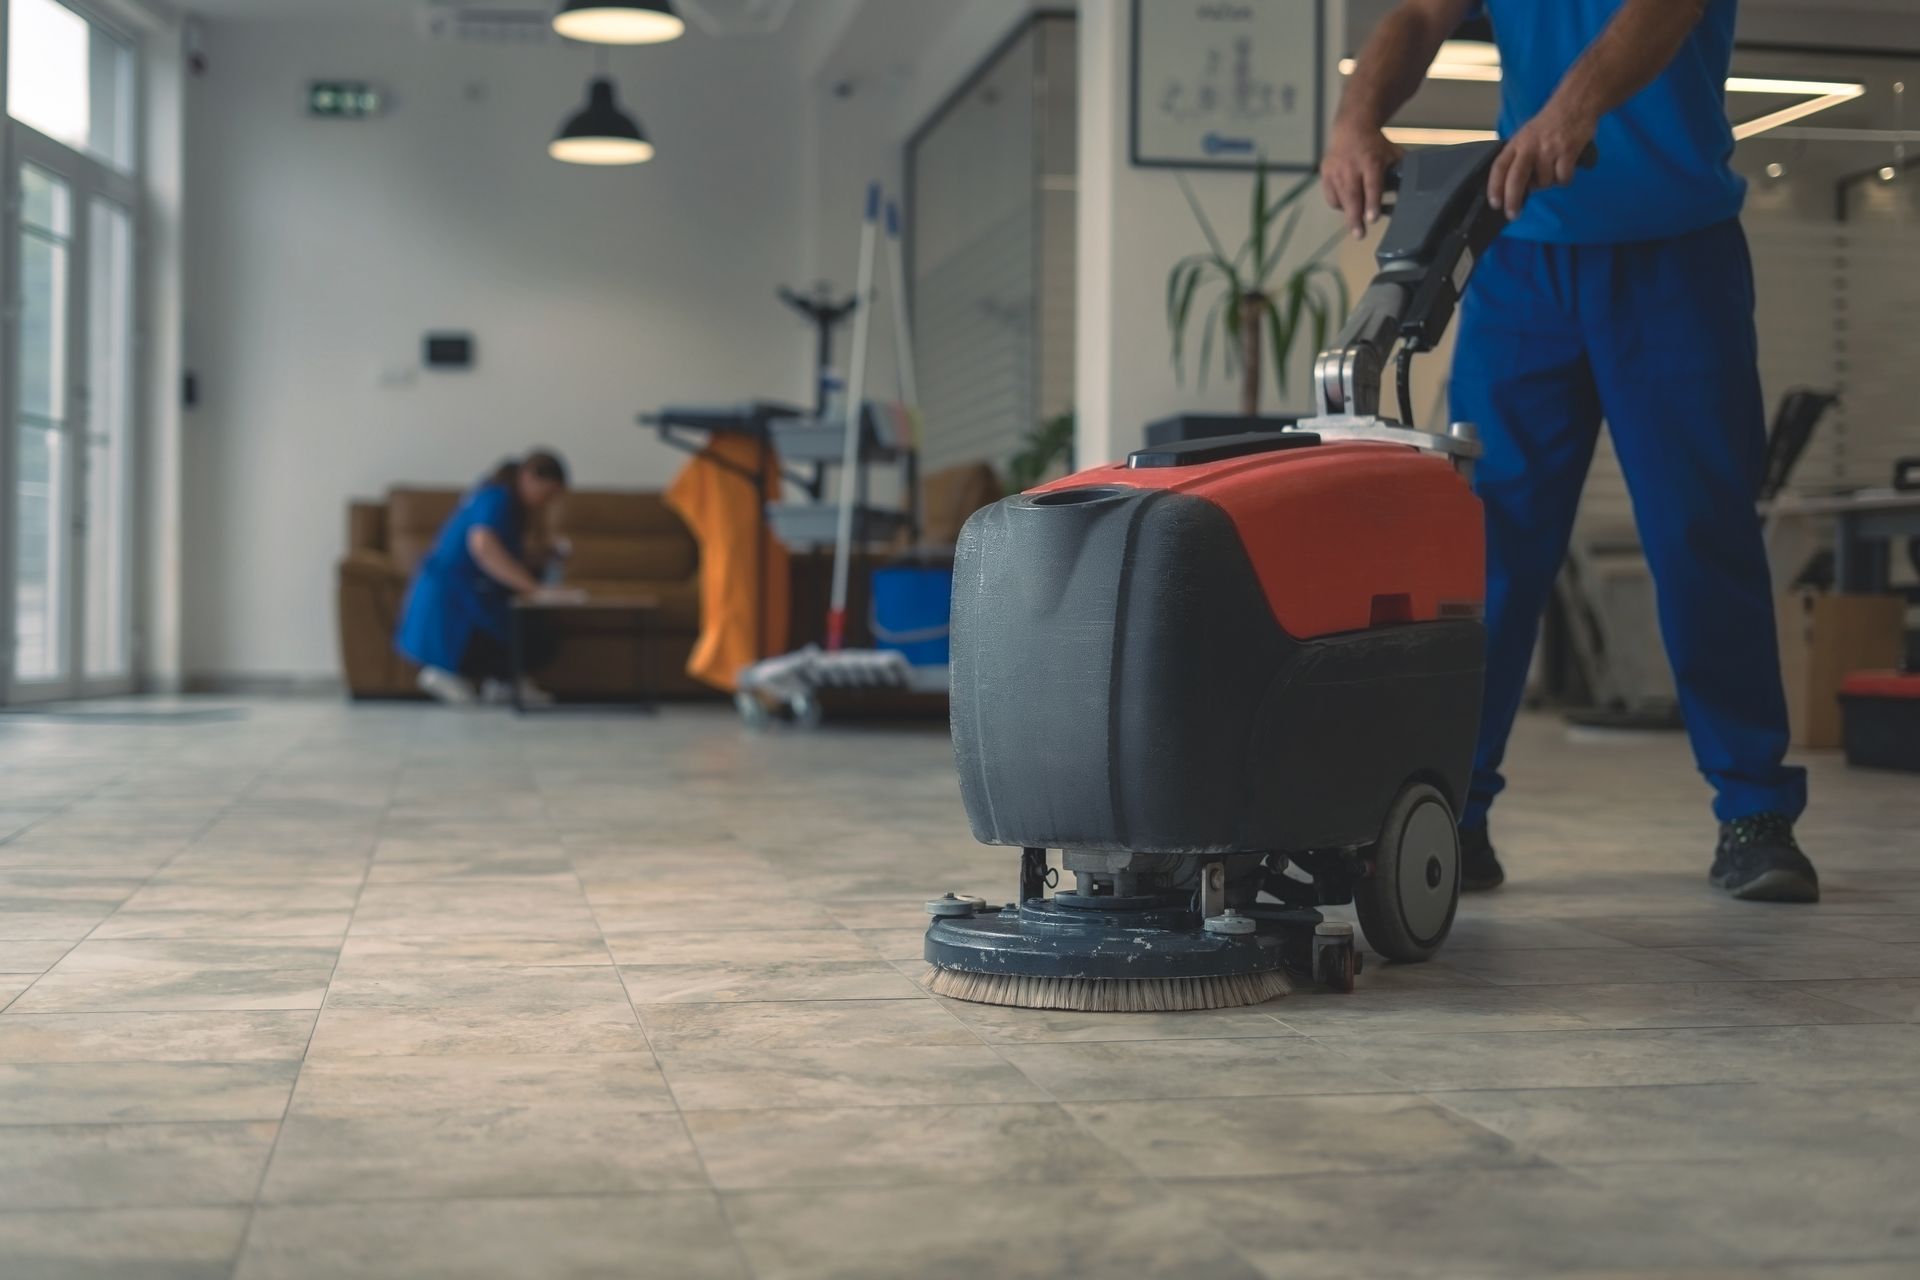 A scrubber machine efficiently cleans a hard floor, while another cleaner works diligently in the background.